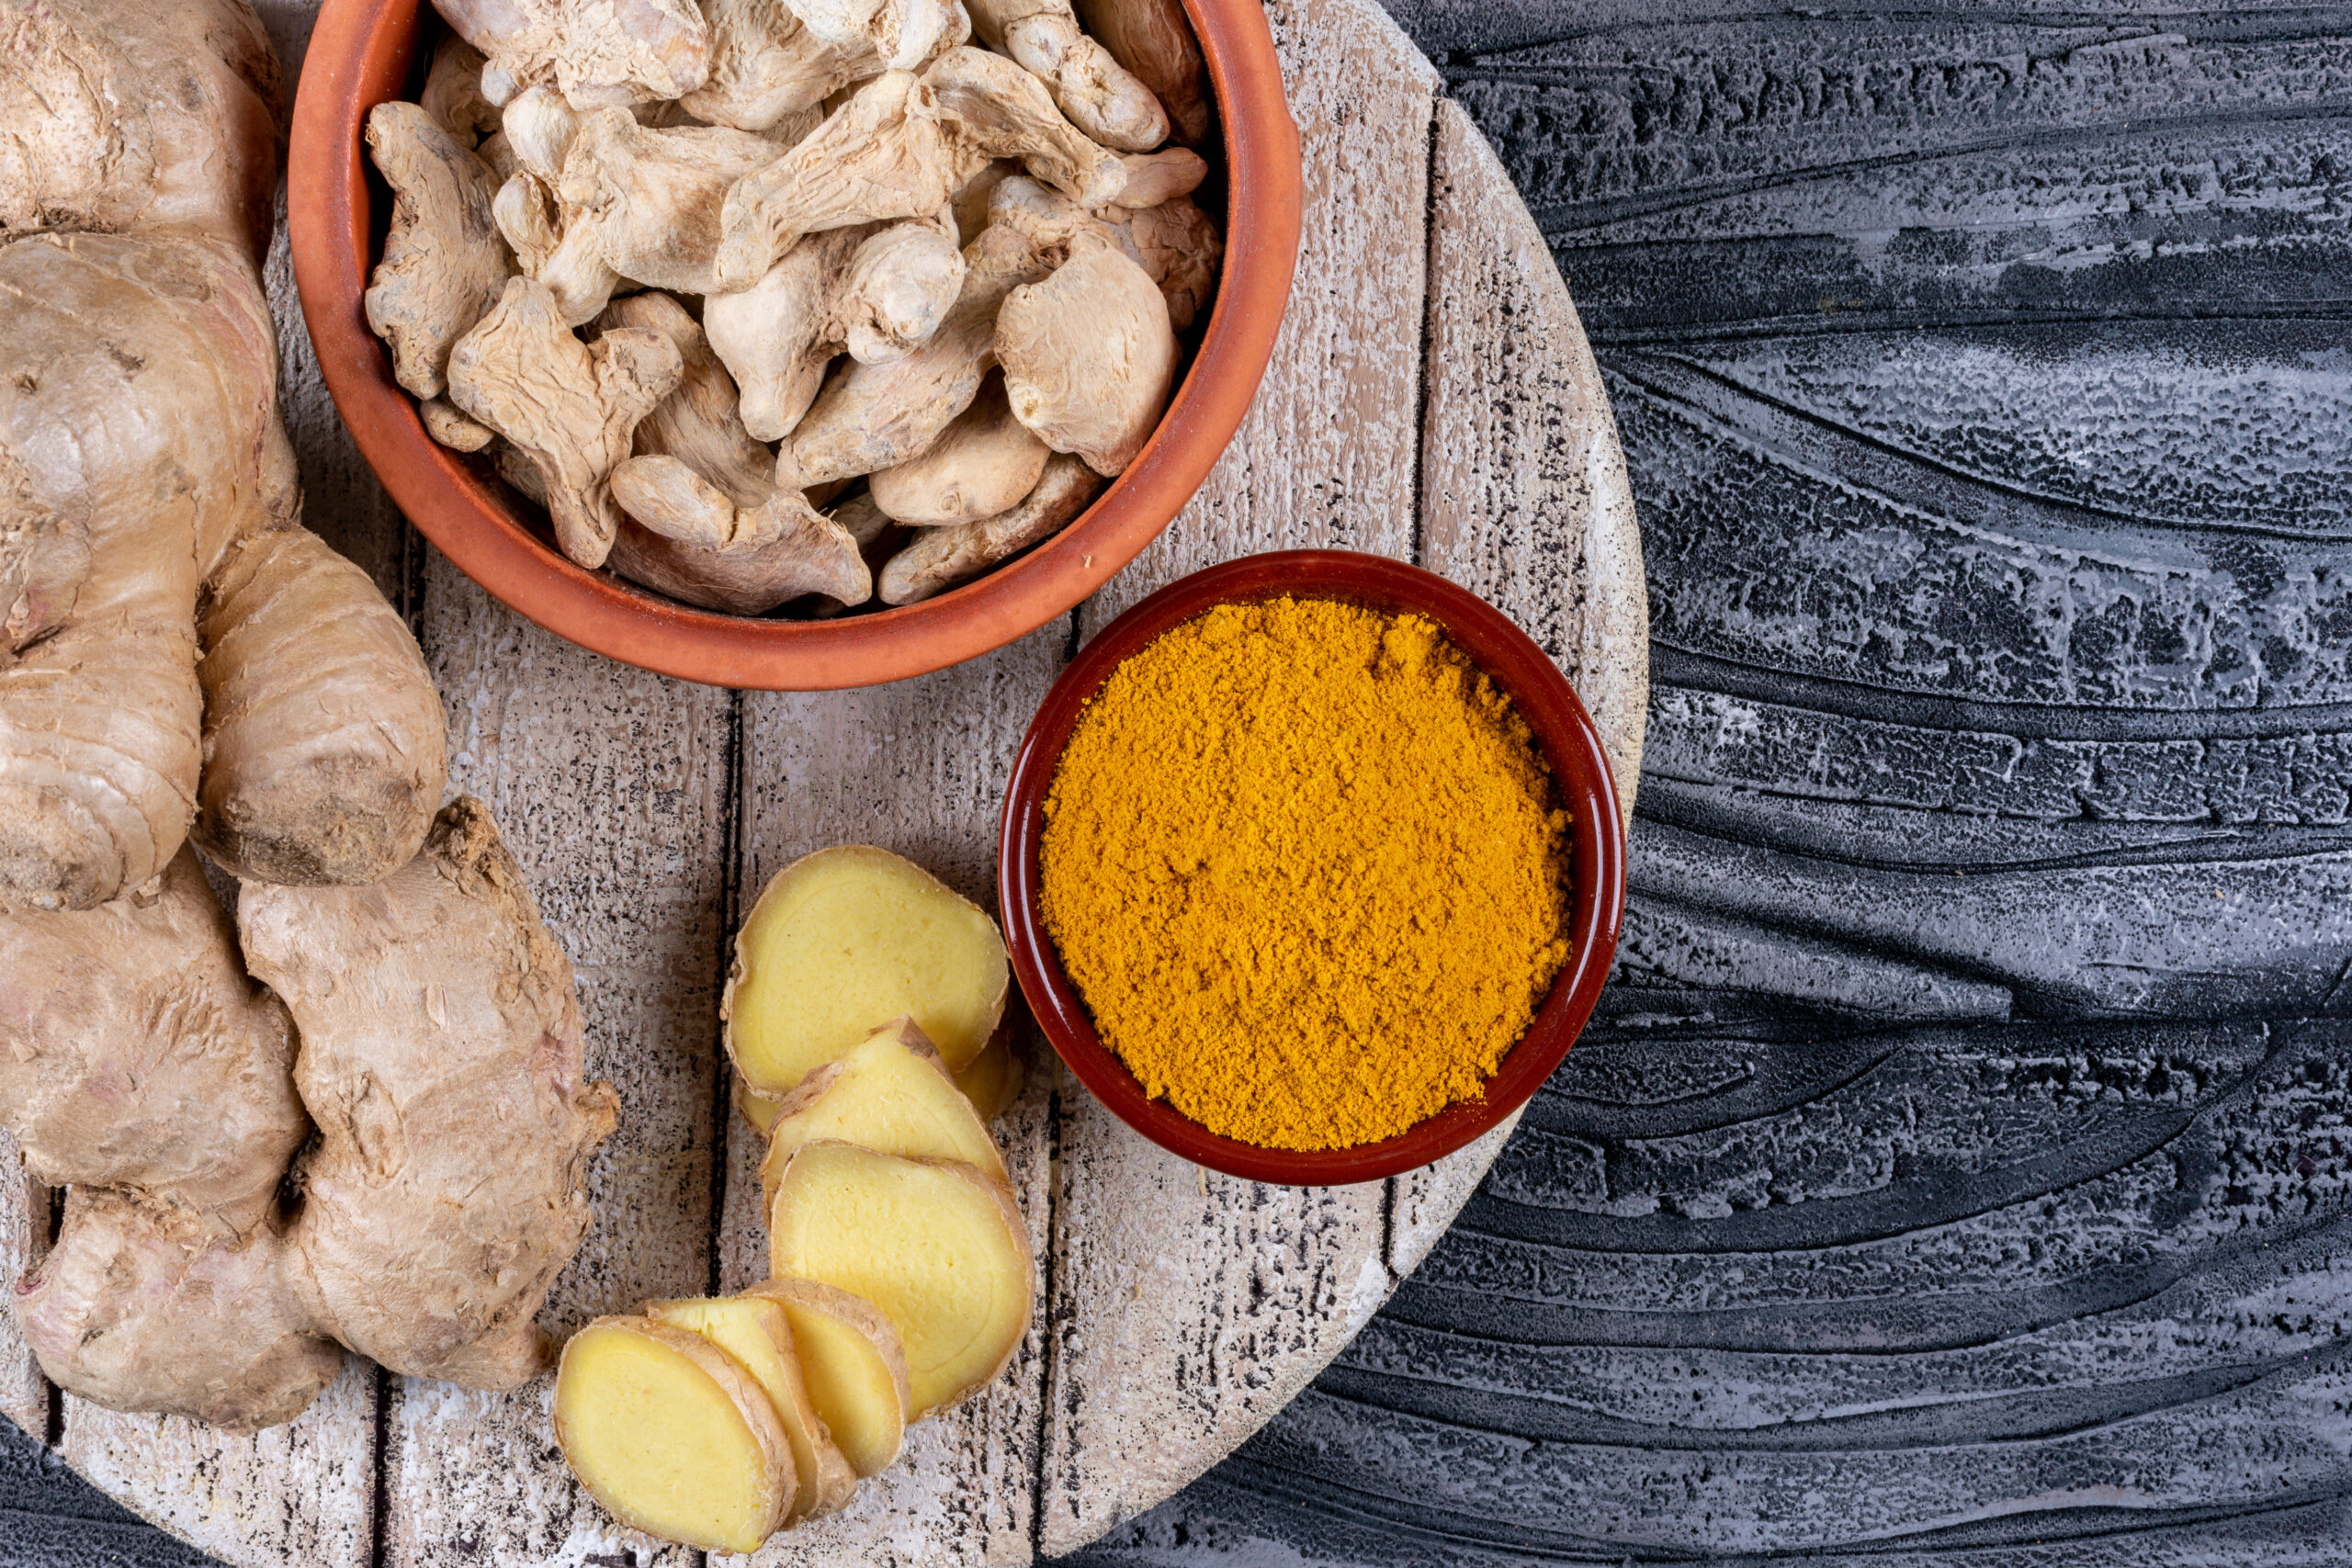 20 benefits of turmeric and ginger